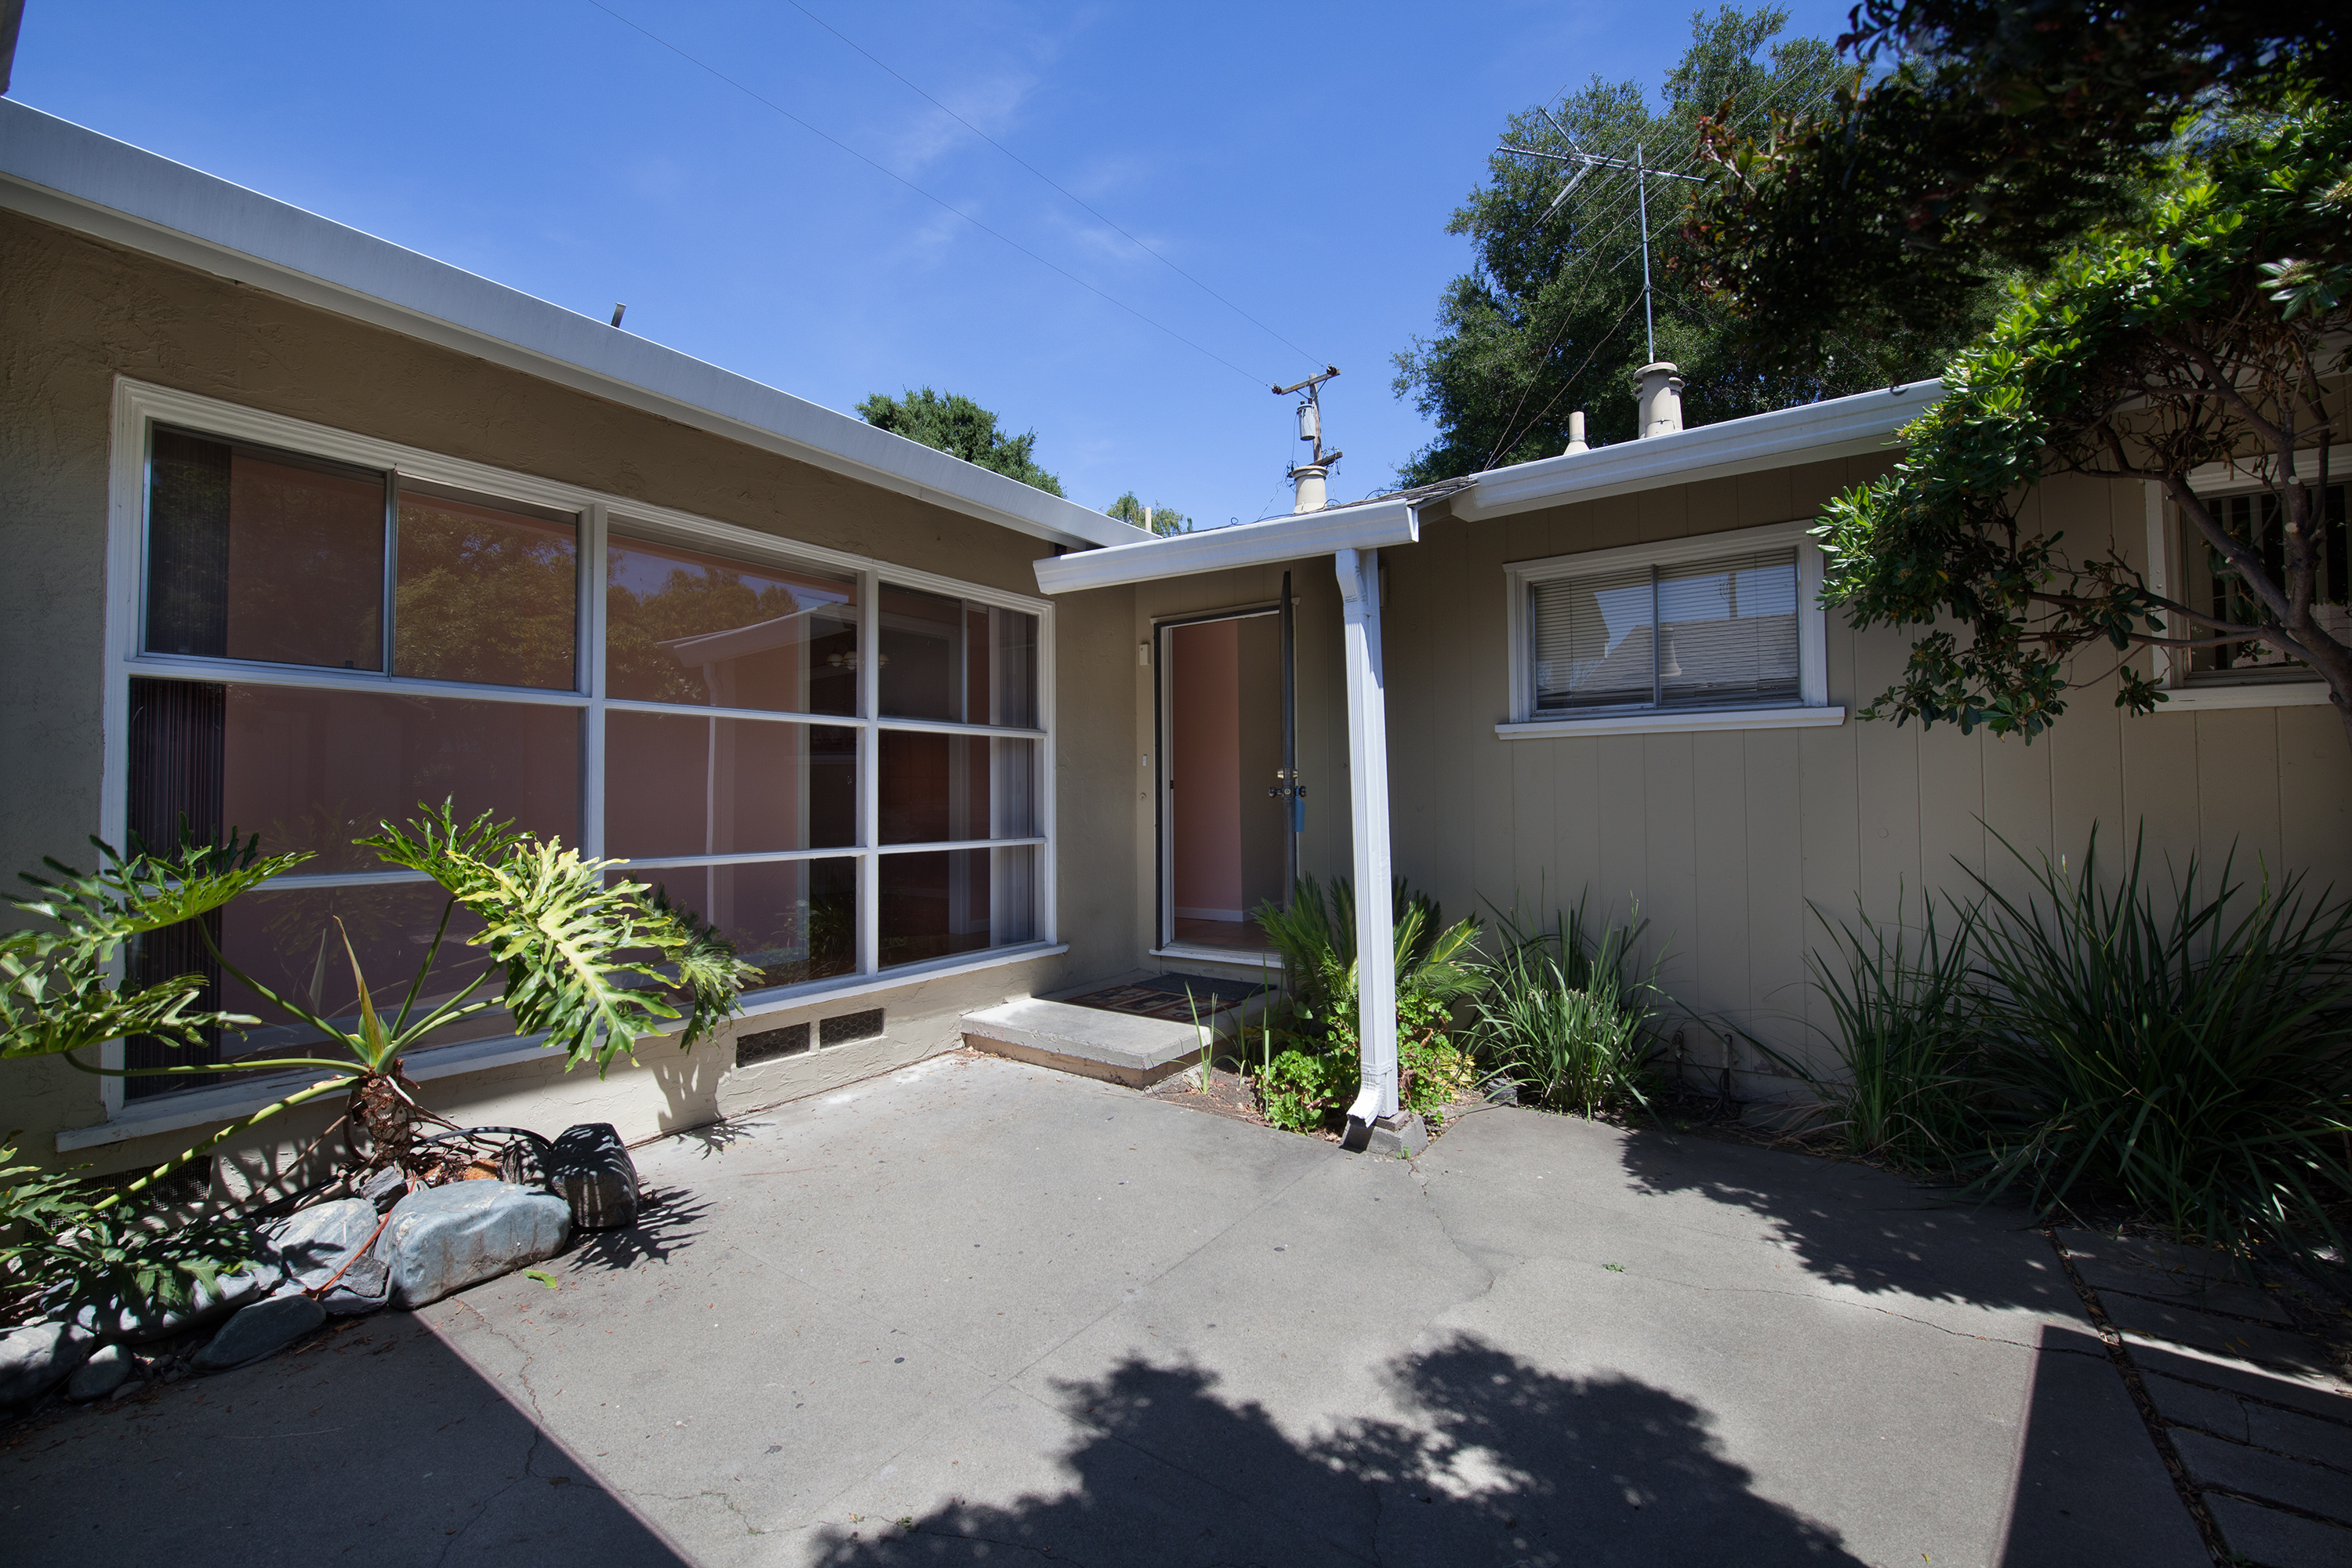 934 S Wolfe Ave, Sunnyvale 94086 - S Wolfe Ave 934 